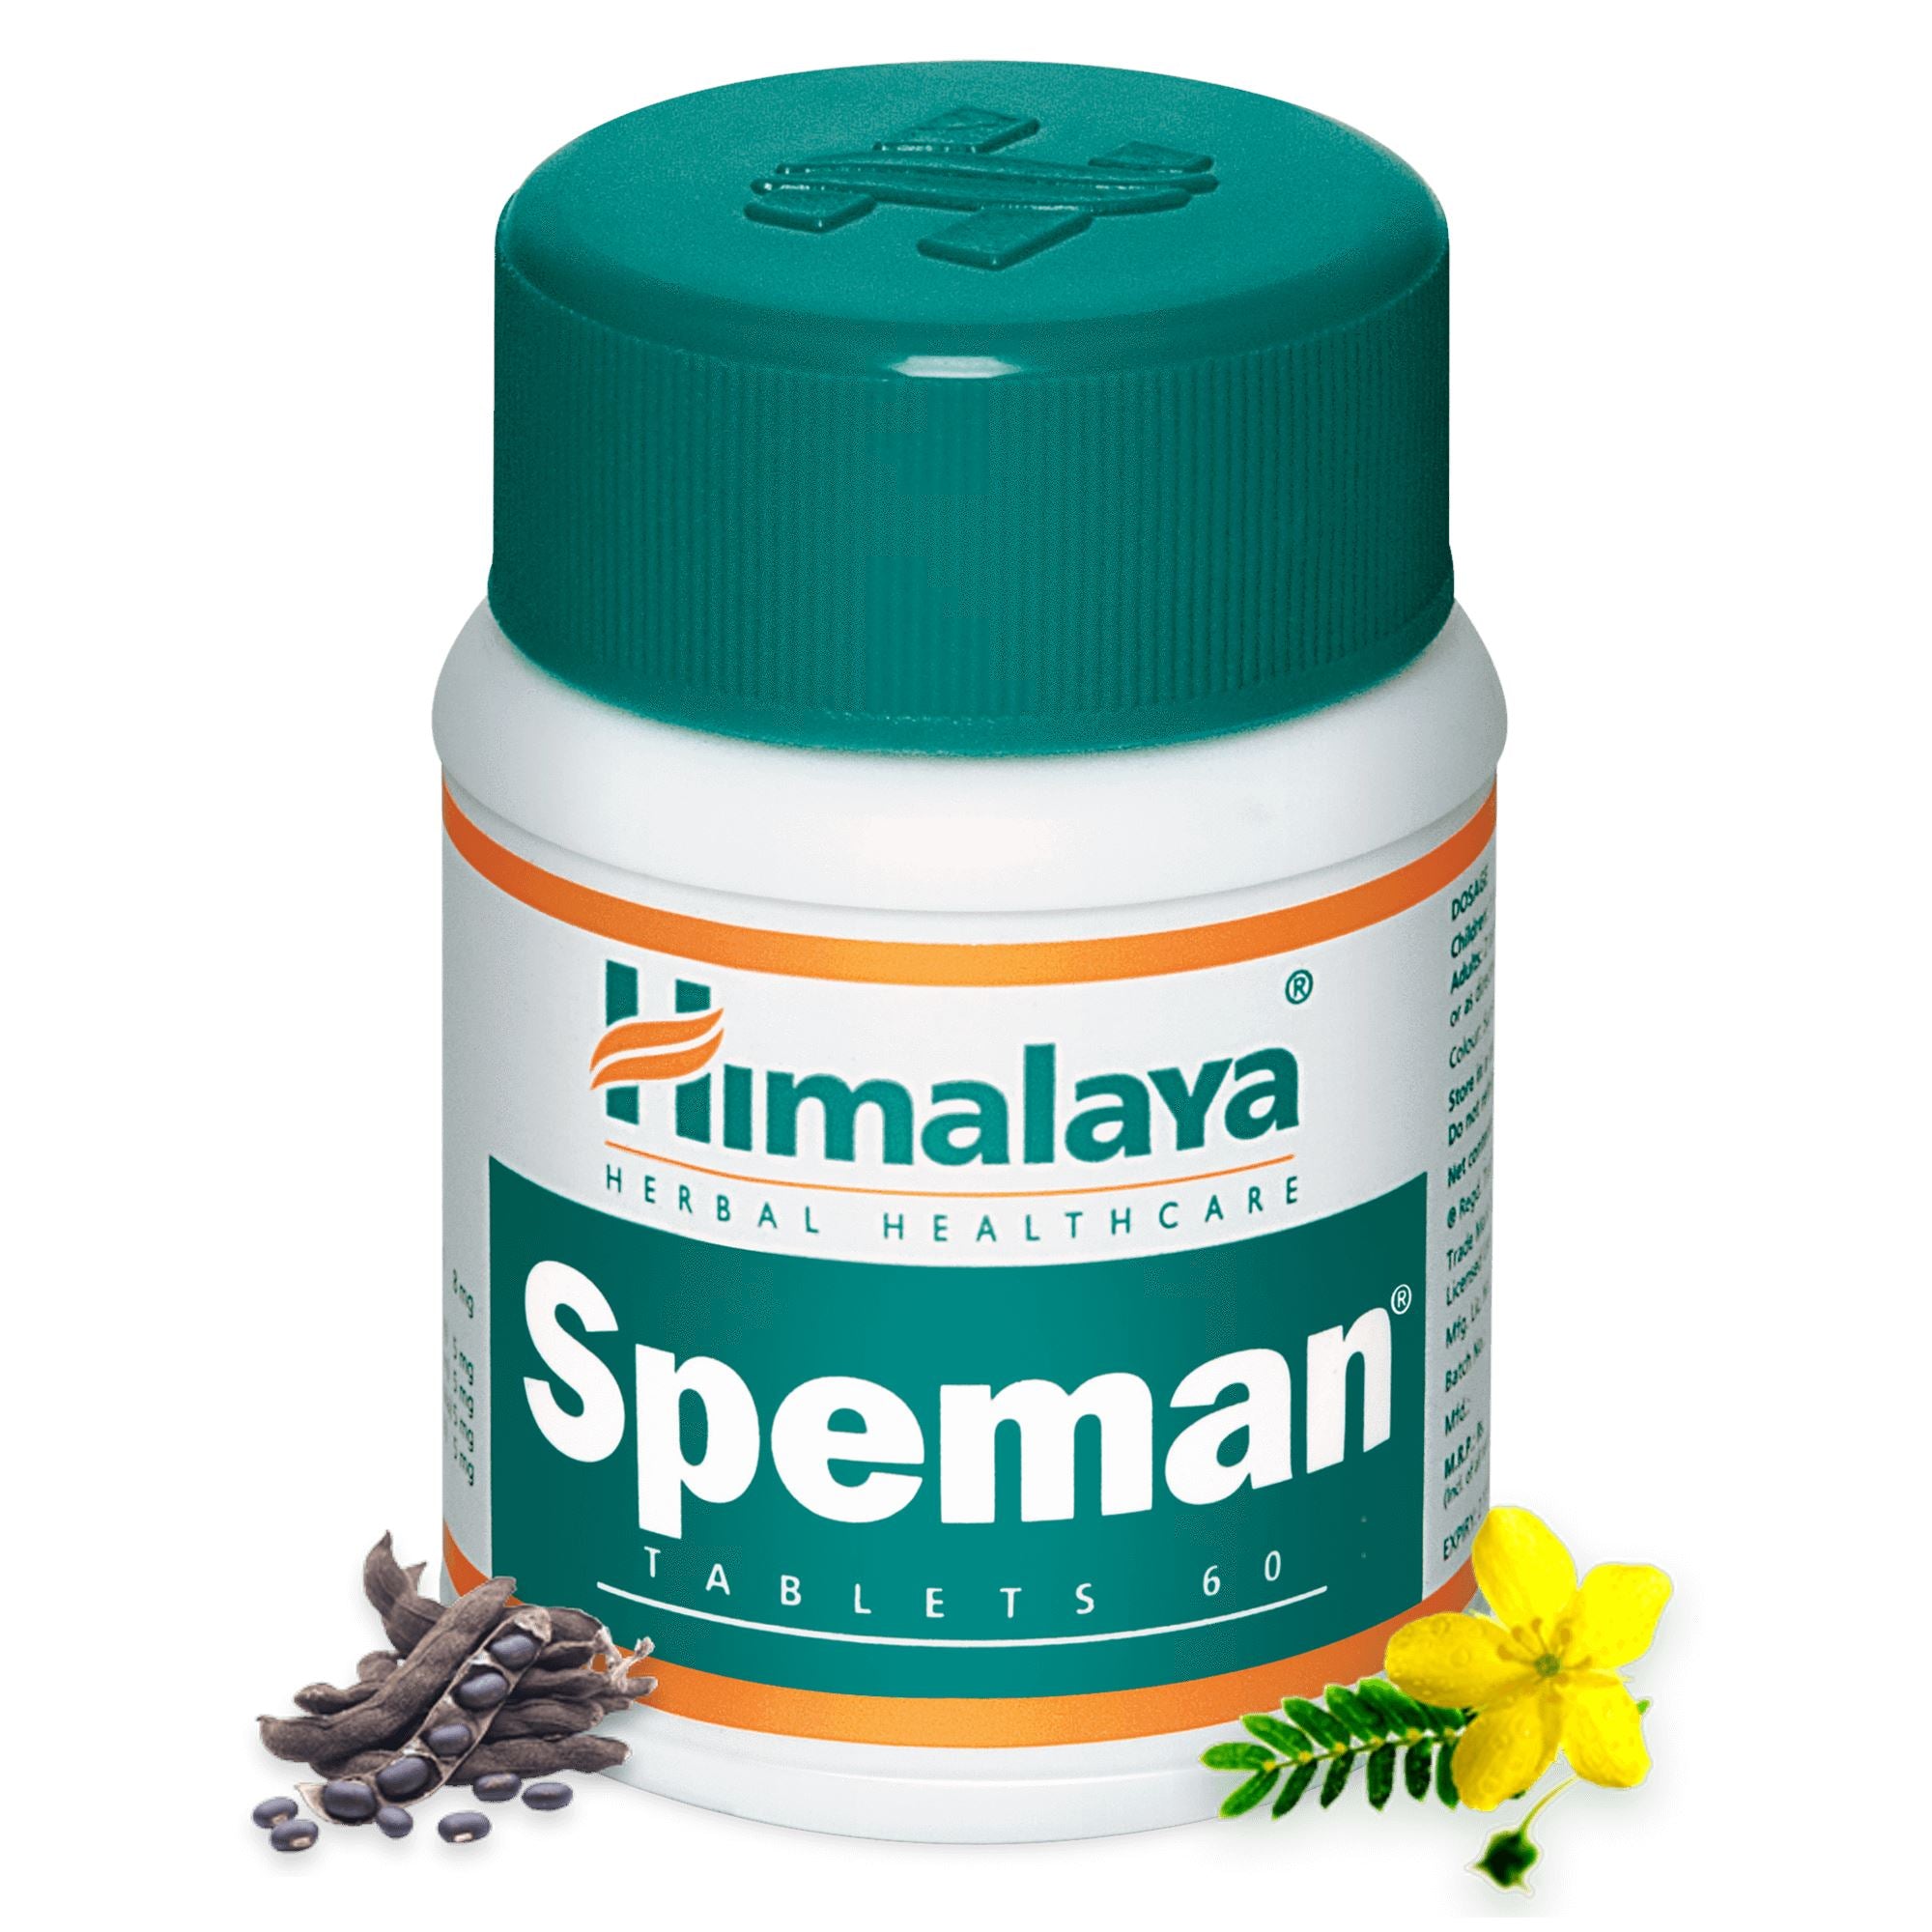 Himalaya Speman -  Improves the sperm count and the quality of semen